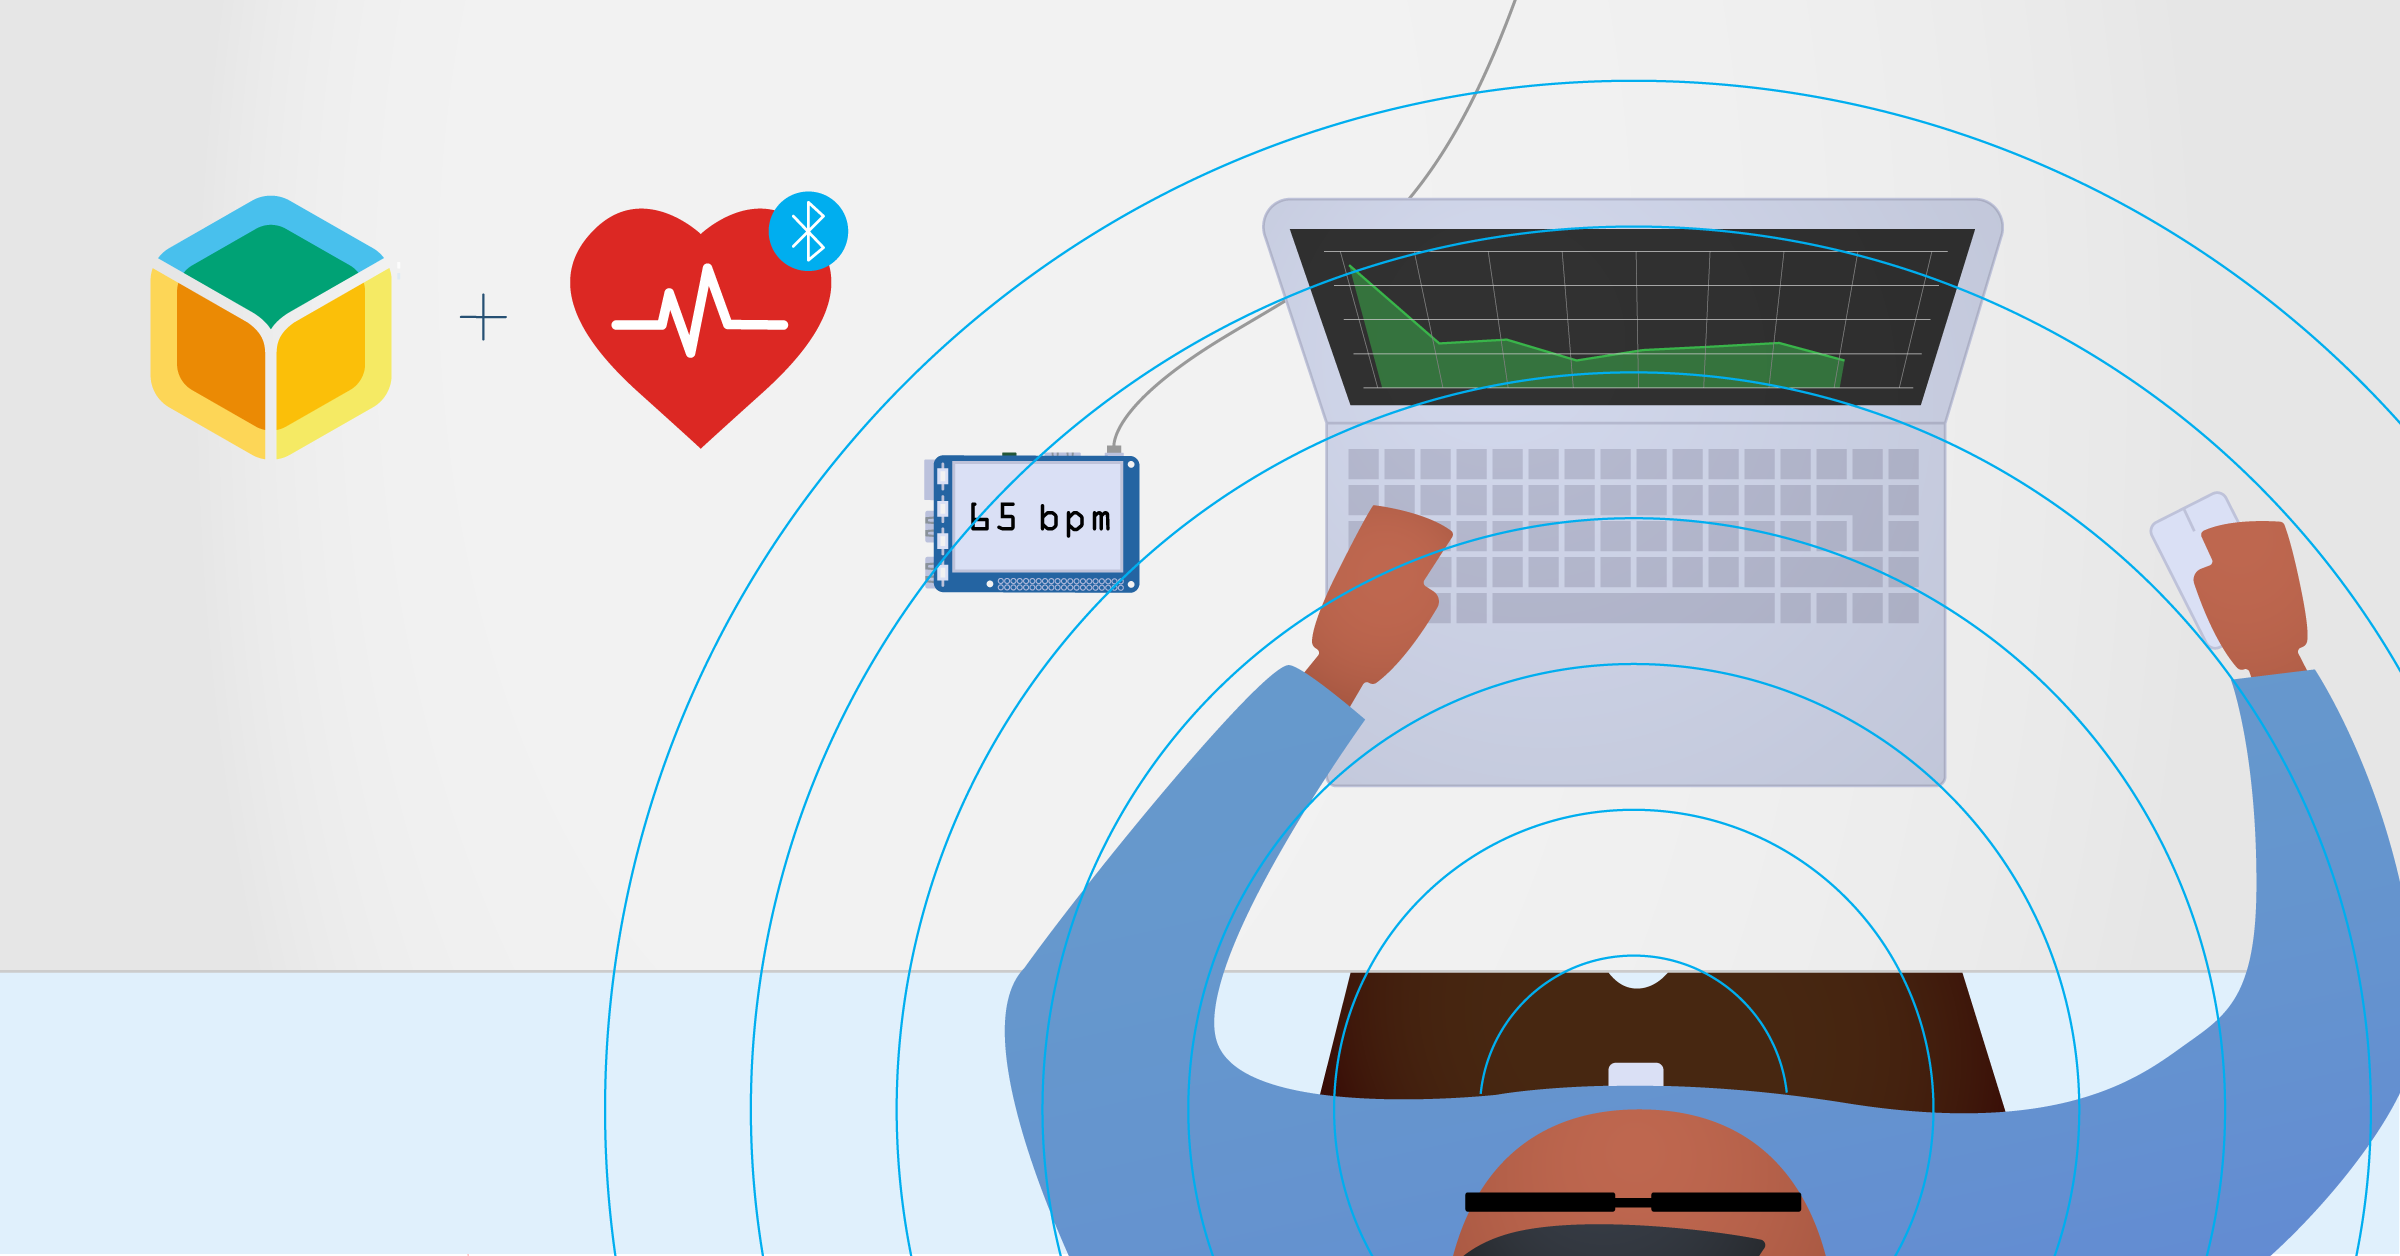 Introducing balenaHealth, a heart rate monitor based on balena and a Raspberry Pi